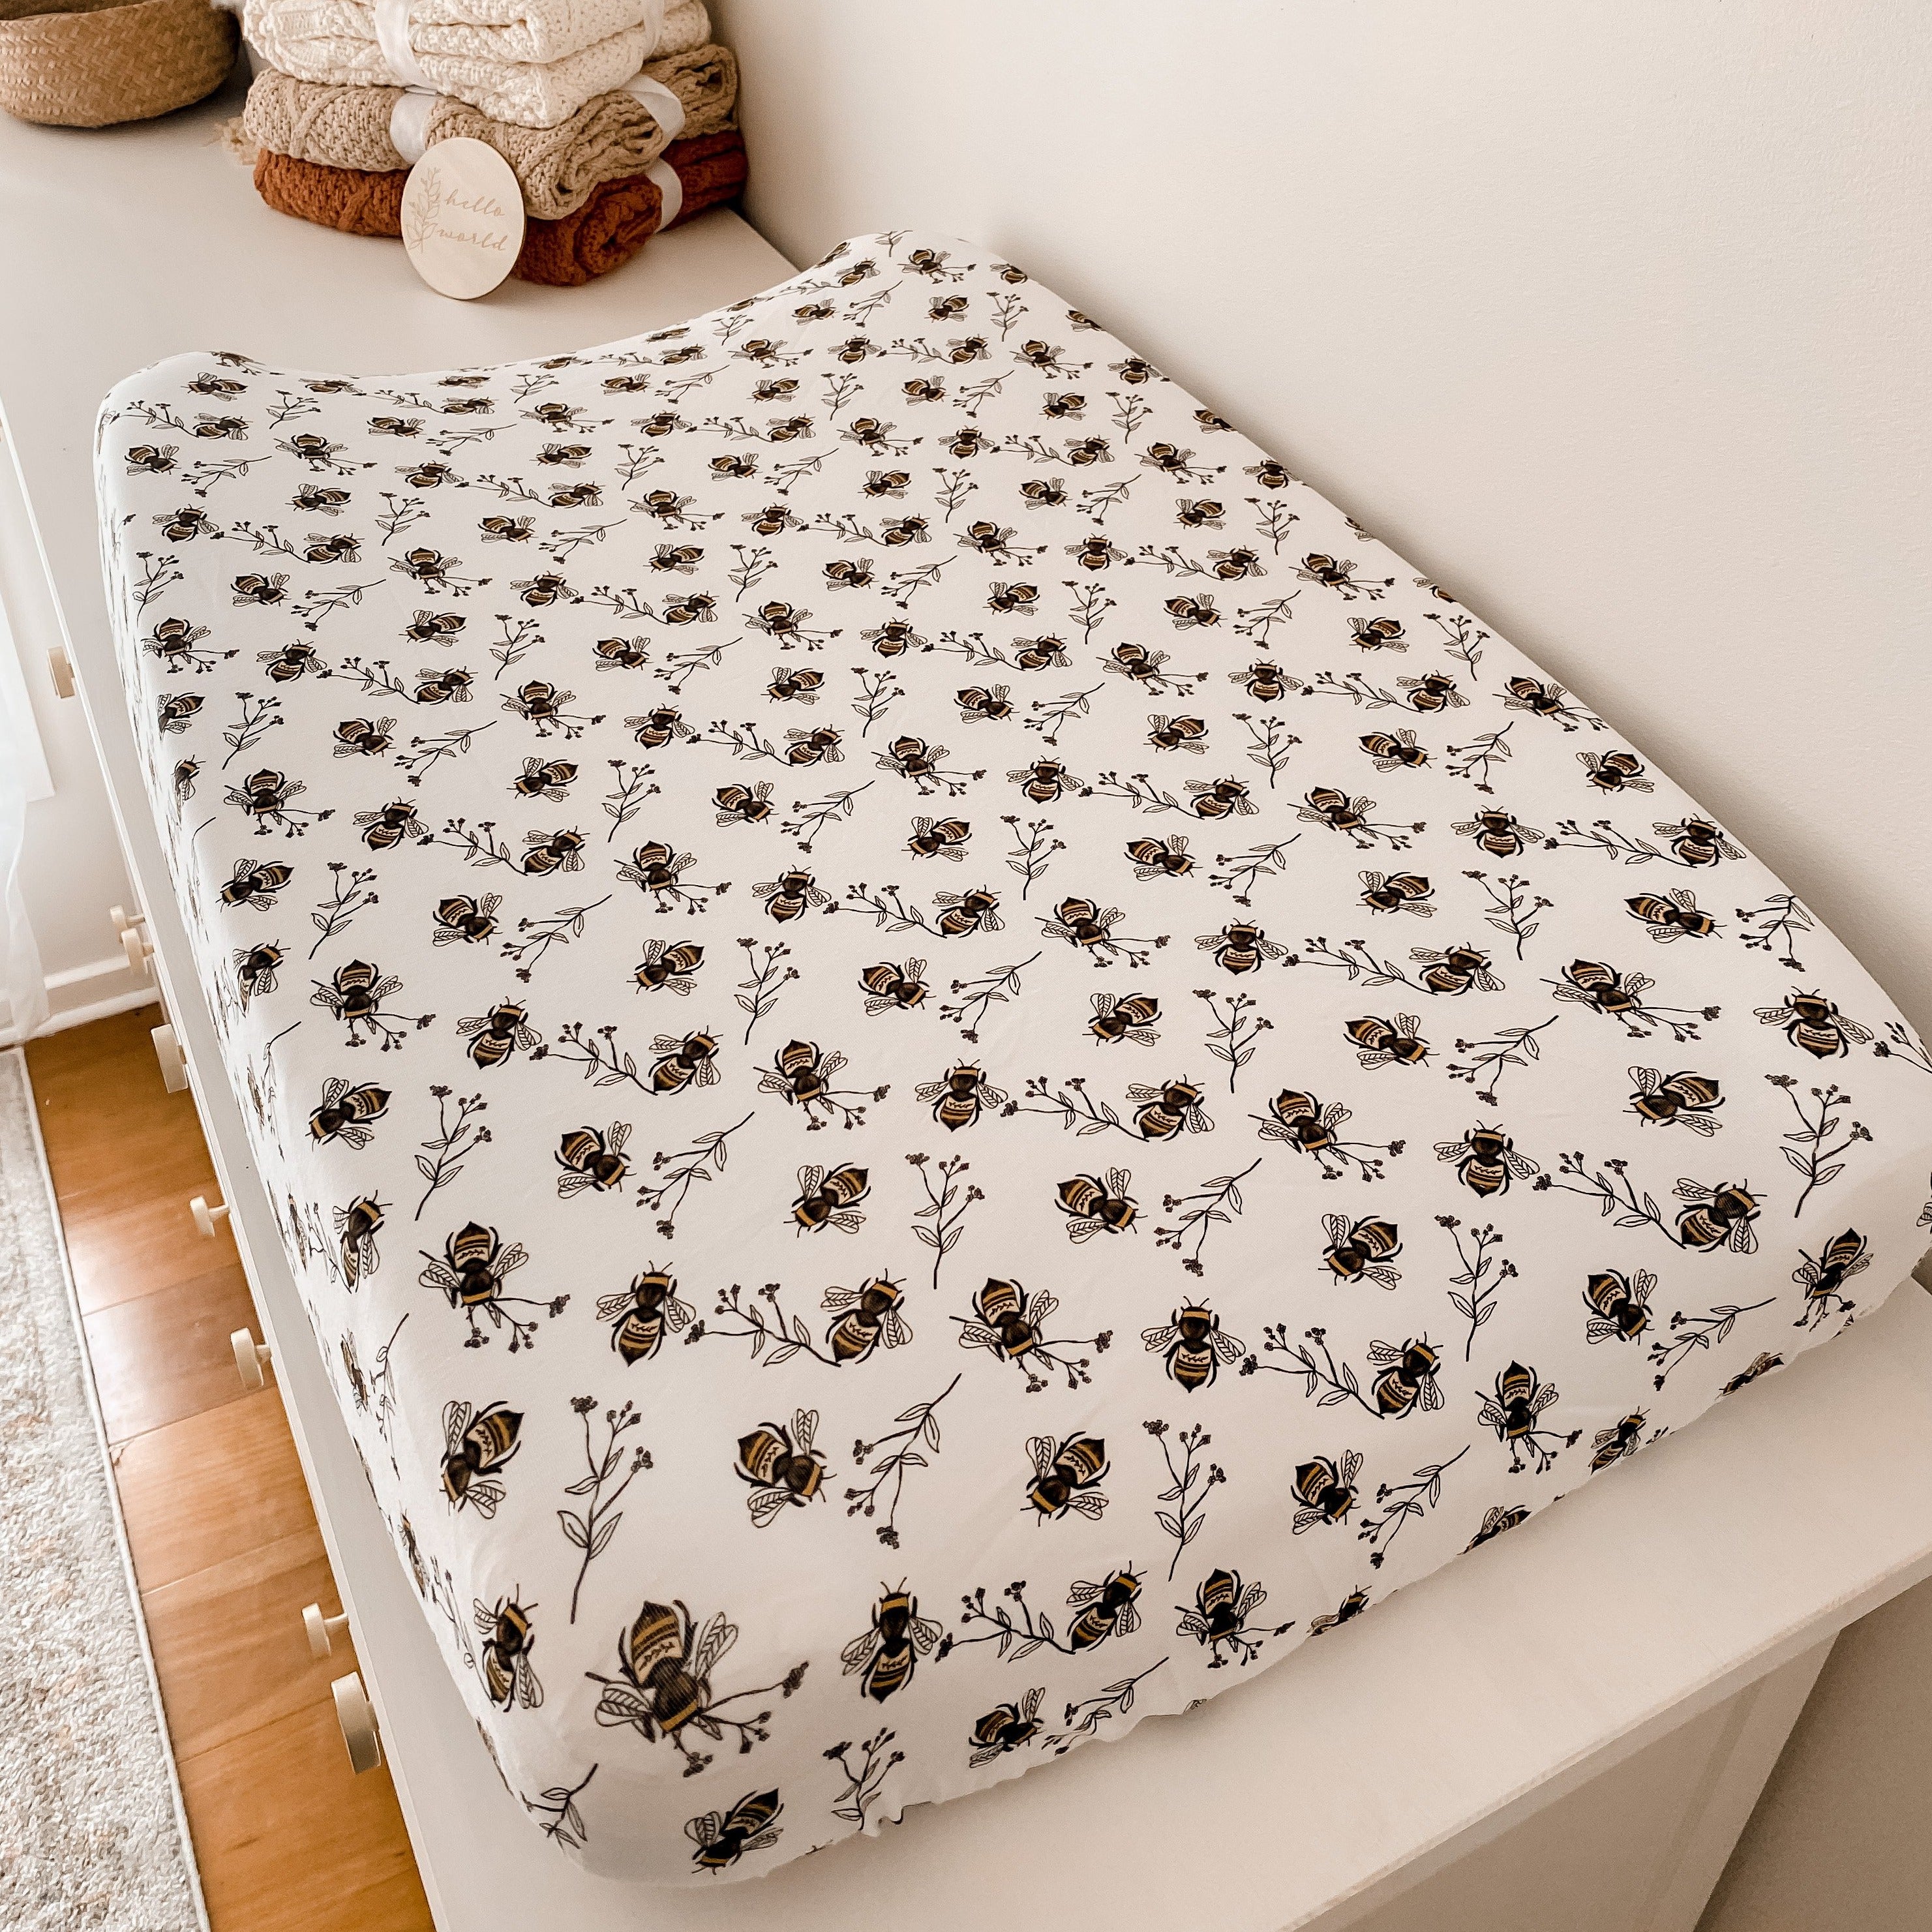 Snuggly Jacks Canada Bees Bassinet Sheet: 95% Cotton 5% Elastane, Stylish Design with Perfect Stretch